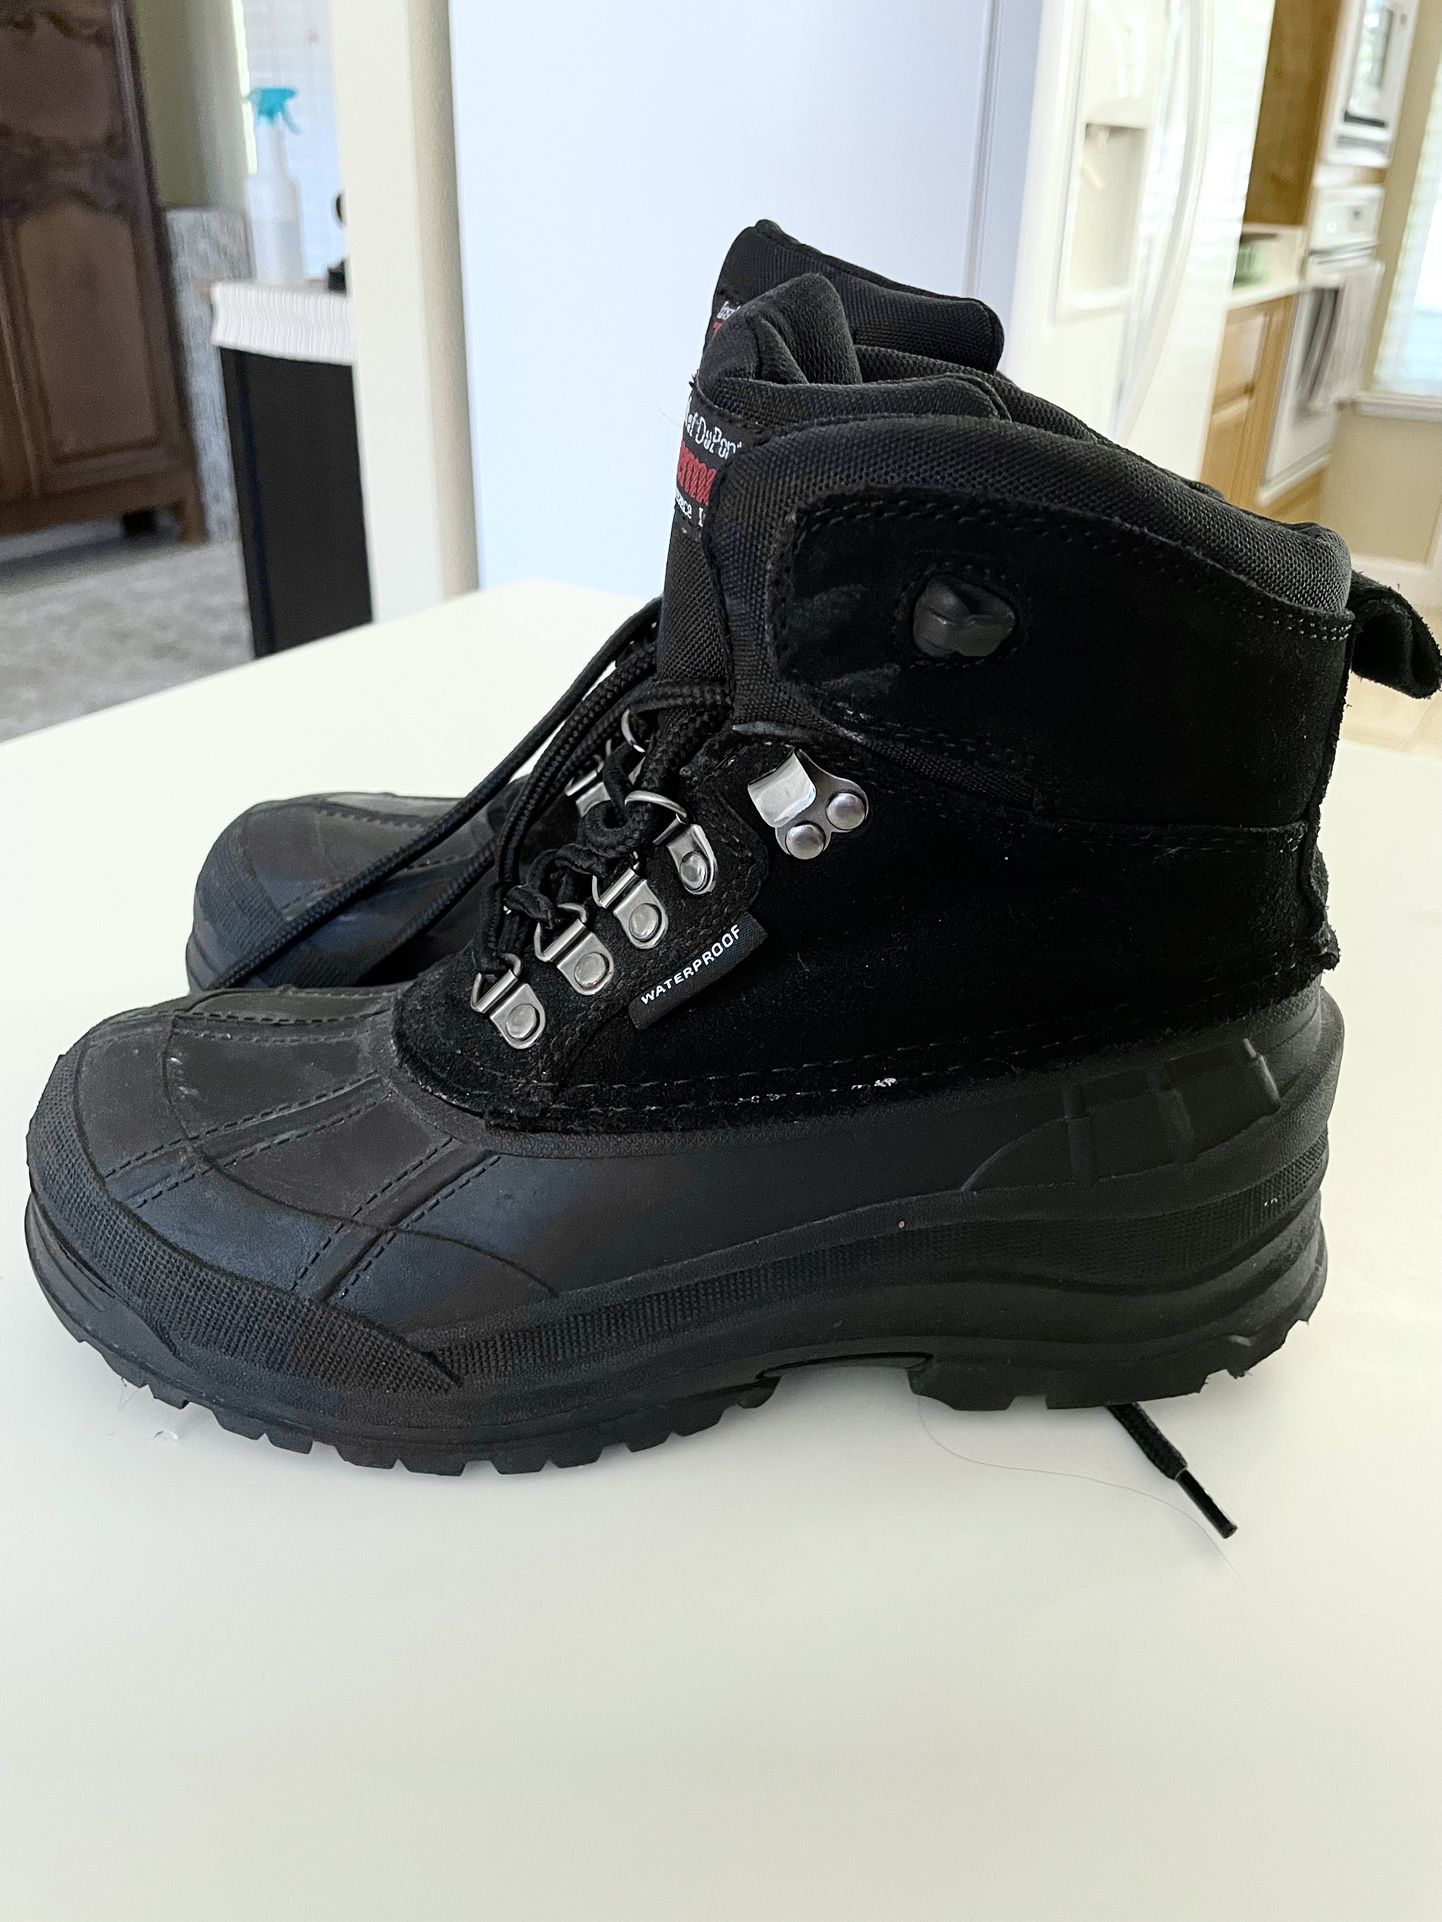 Men’s Size 7W Thermolite Waterproof Boots